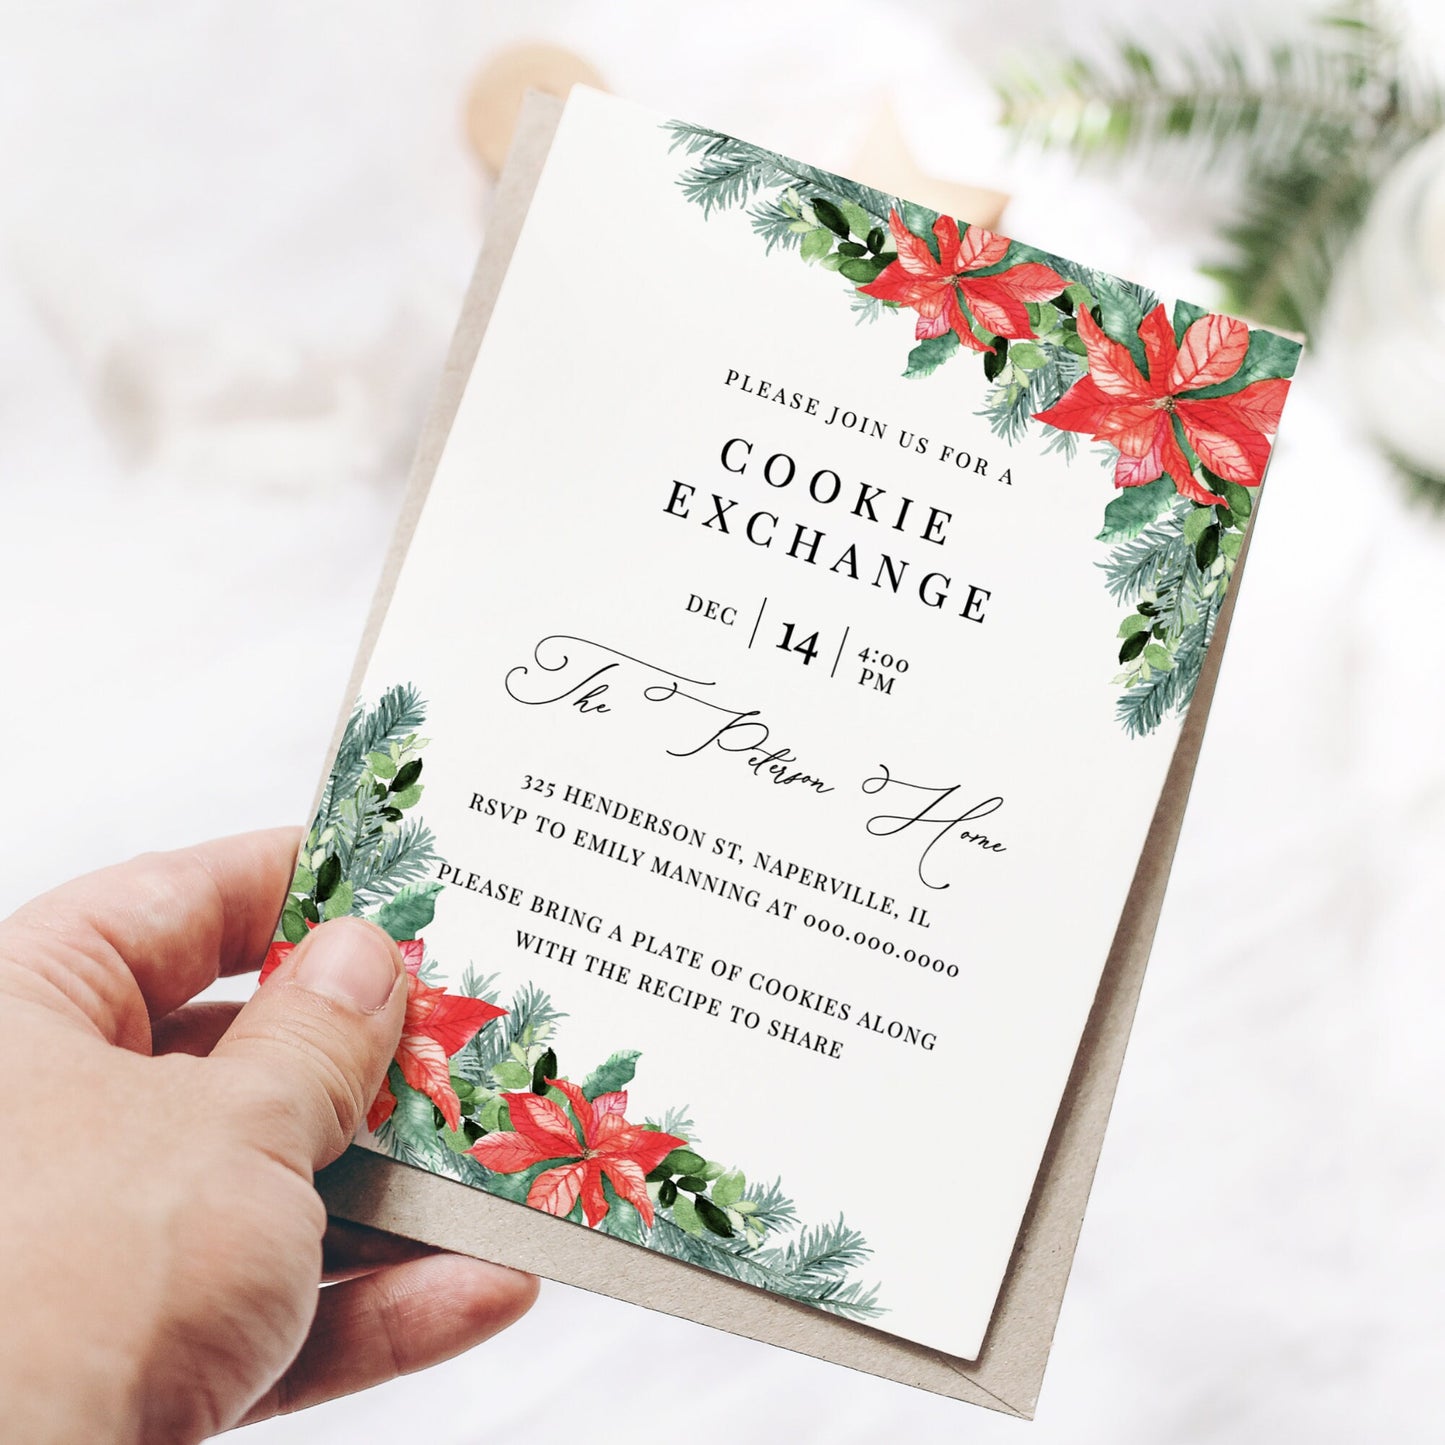 Editable Cookie Exchange Invitation Winter Poinsettia Christmas Cookie Party Invite Template